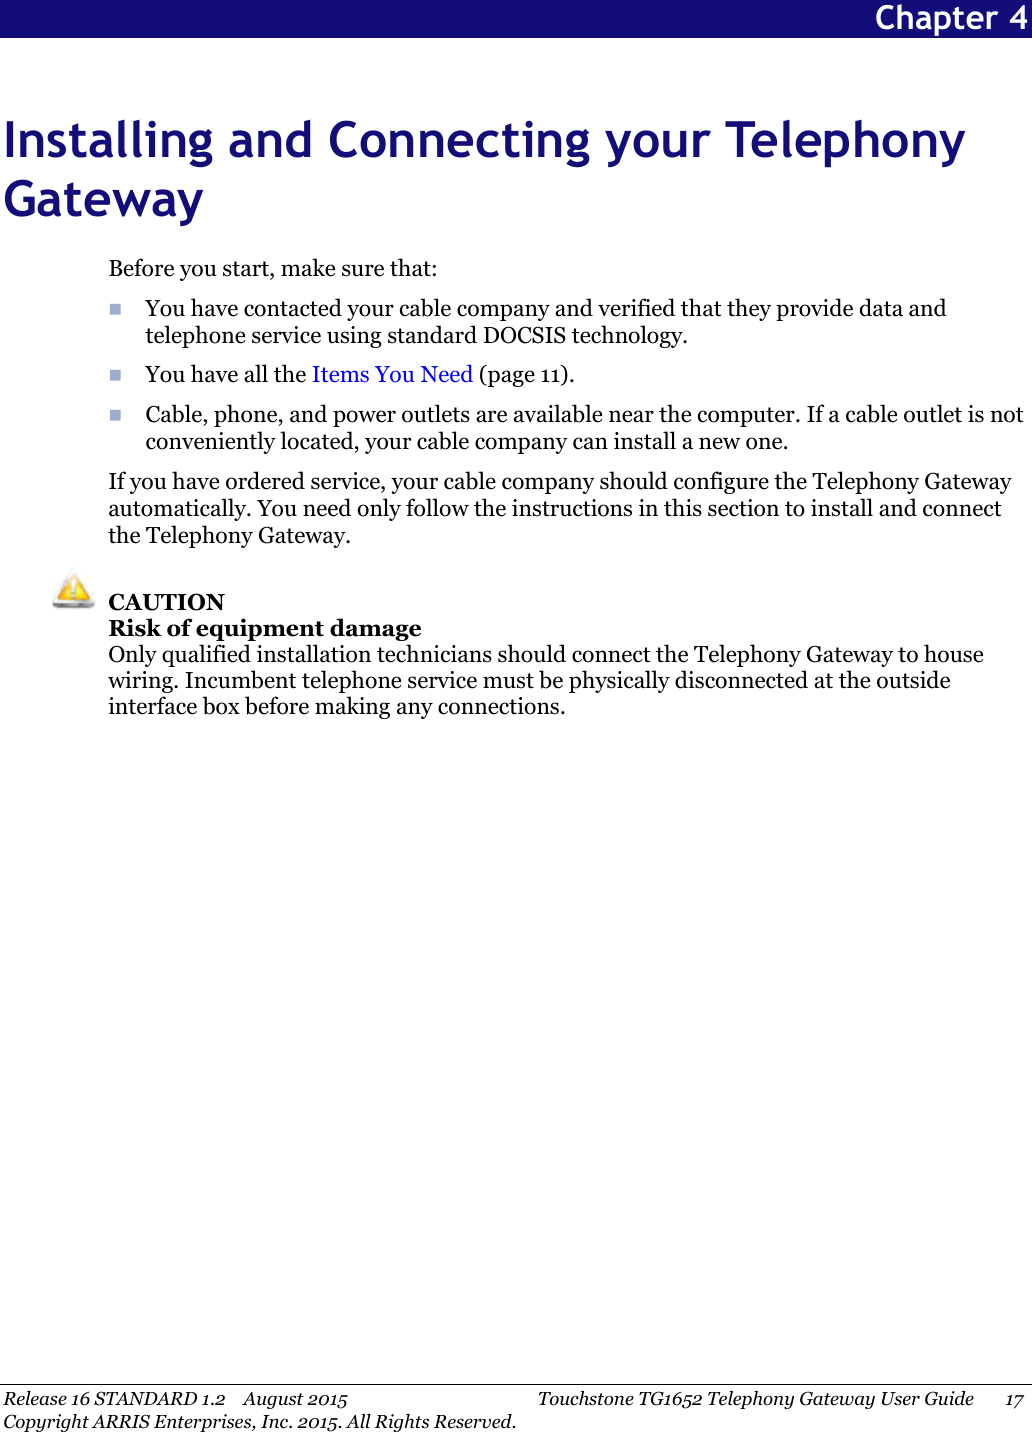 Release 16 STANDARD 1.2 August 2015 Touchstone TG1652 Telephony Gateway User Guide 17Copyright ARRIS Enterprises, Inc. 2015. All Rights Reserved.Chapter 4Installing and Connecting your TelephonyGatewayBefore you start, make sure that:You have contacted your cable company and verified that they provide data andtelephone service using standard DOCSIS technology.You have all the Items You Need (page 11).Cable, phone, and power outlets are available near the computer. If a cable outlet is notconveniently located, your cable company can install a new one.If you have ordered service, your cable company should configure the Telephony Gatewayautomatically. You need only follow the instructions in this section to install and connectthe Telephony Gateway.CAUTIONRisk of equipment damageOnly qualified installation technicians should connect the Telephony Gateway to housewiring. Incumbent telephone service must be physically disconnected at the outsideinterface box before making any connections.